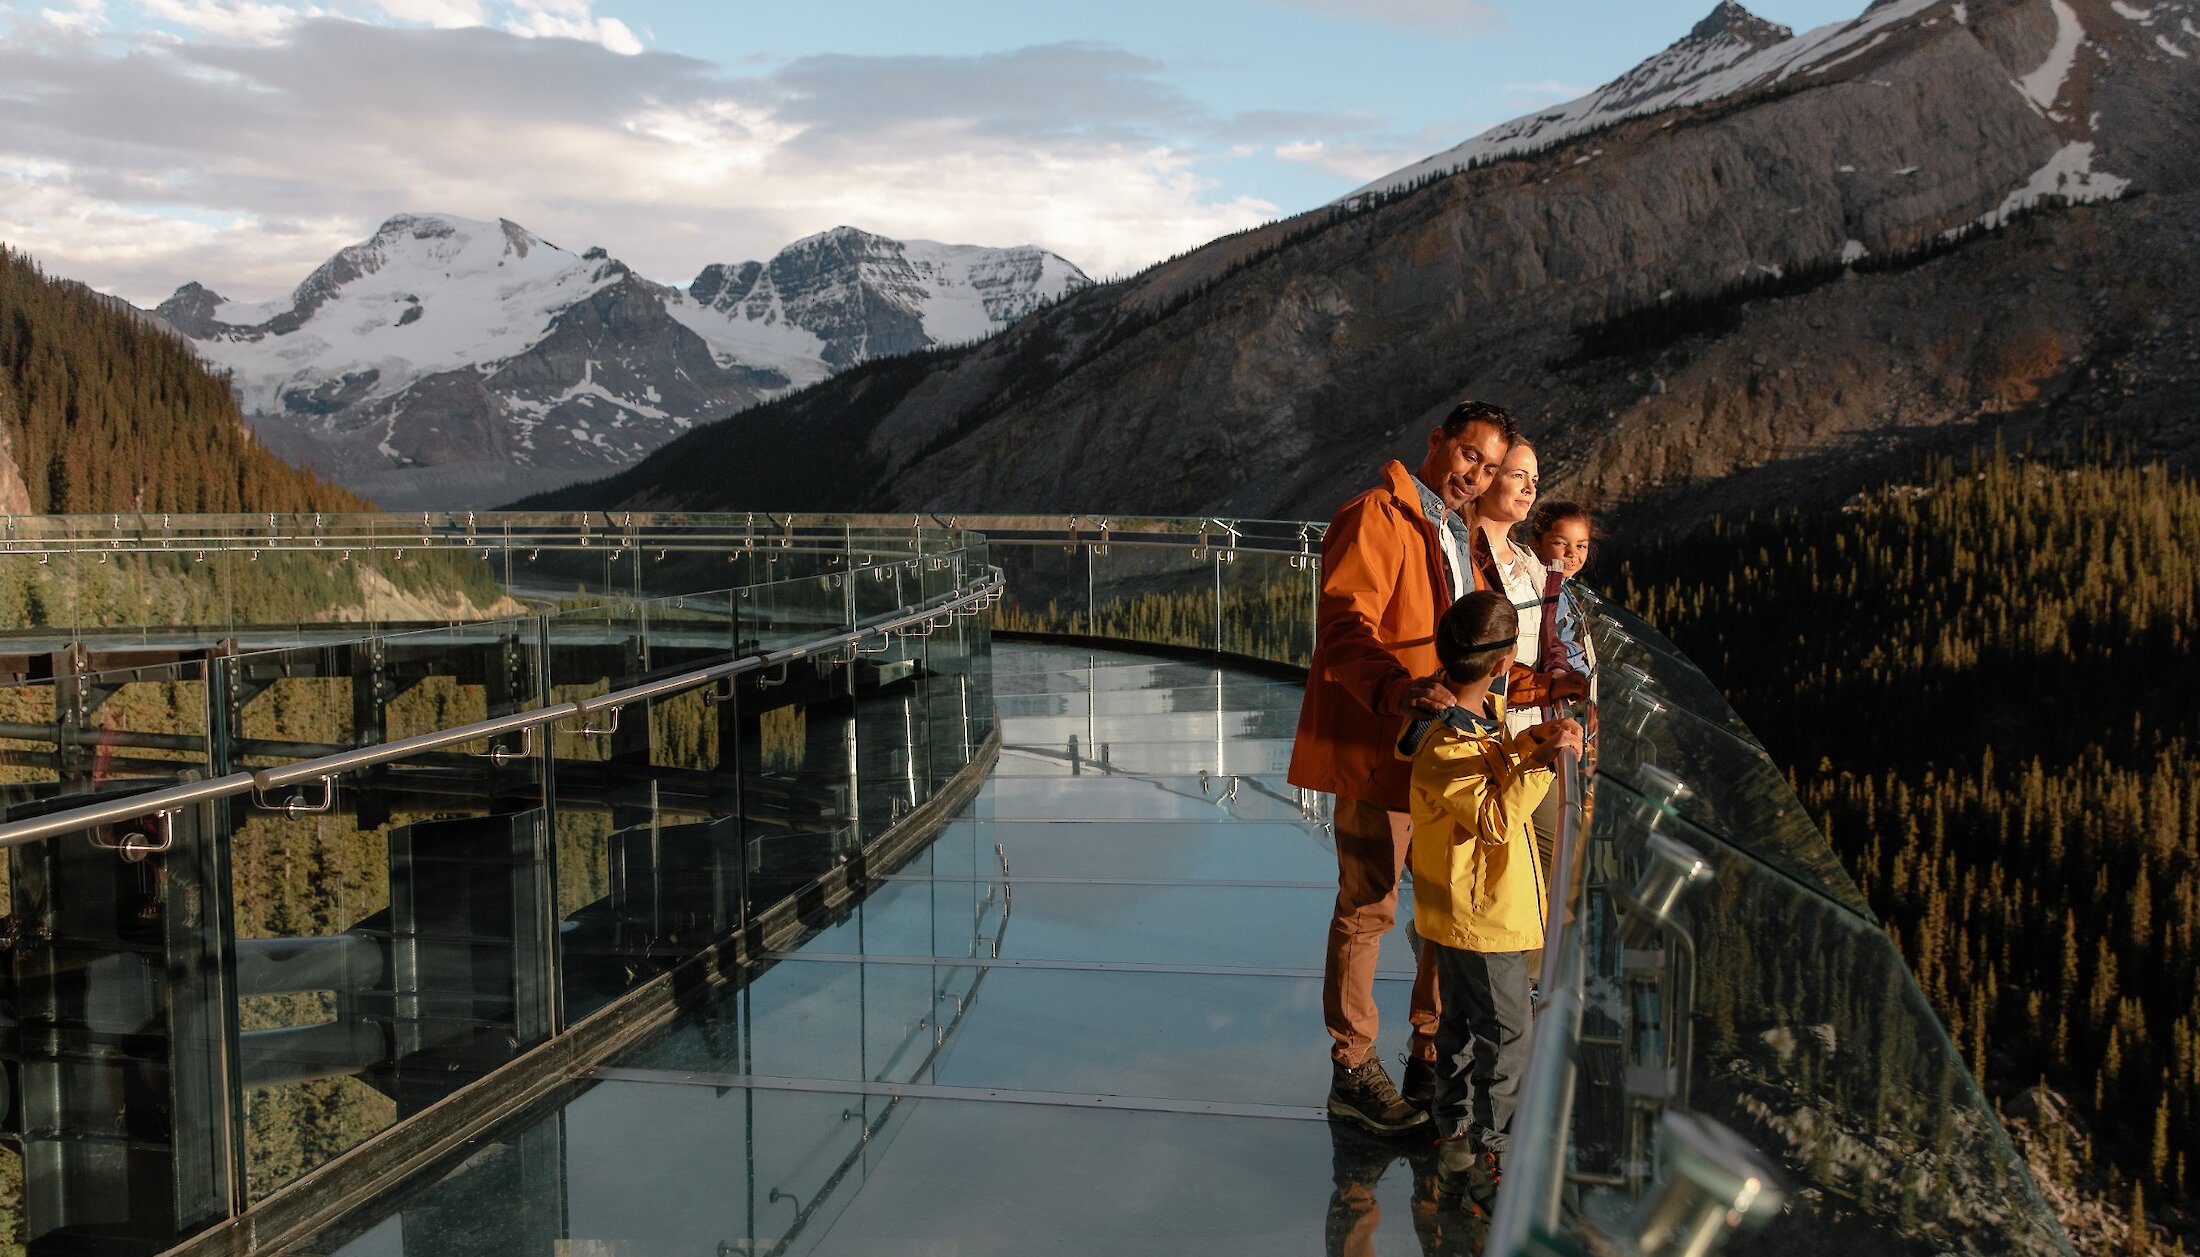 Enjoying the views from the Skywalk at the Columbia Icefield